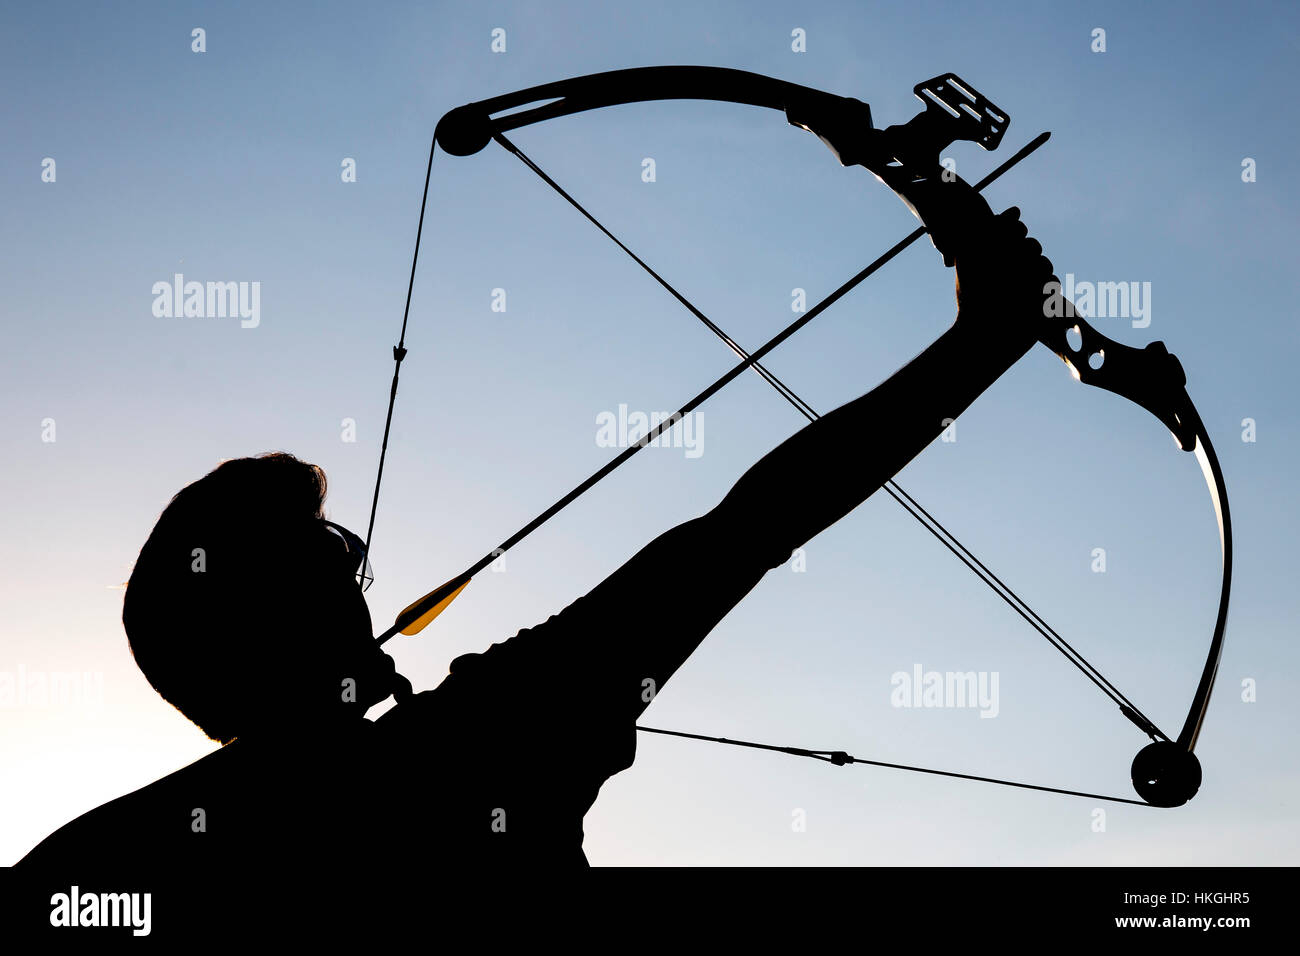 A silhouette of an archer draws his compound bow and aims upwards with clean blue sky as background. Stock Photo